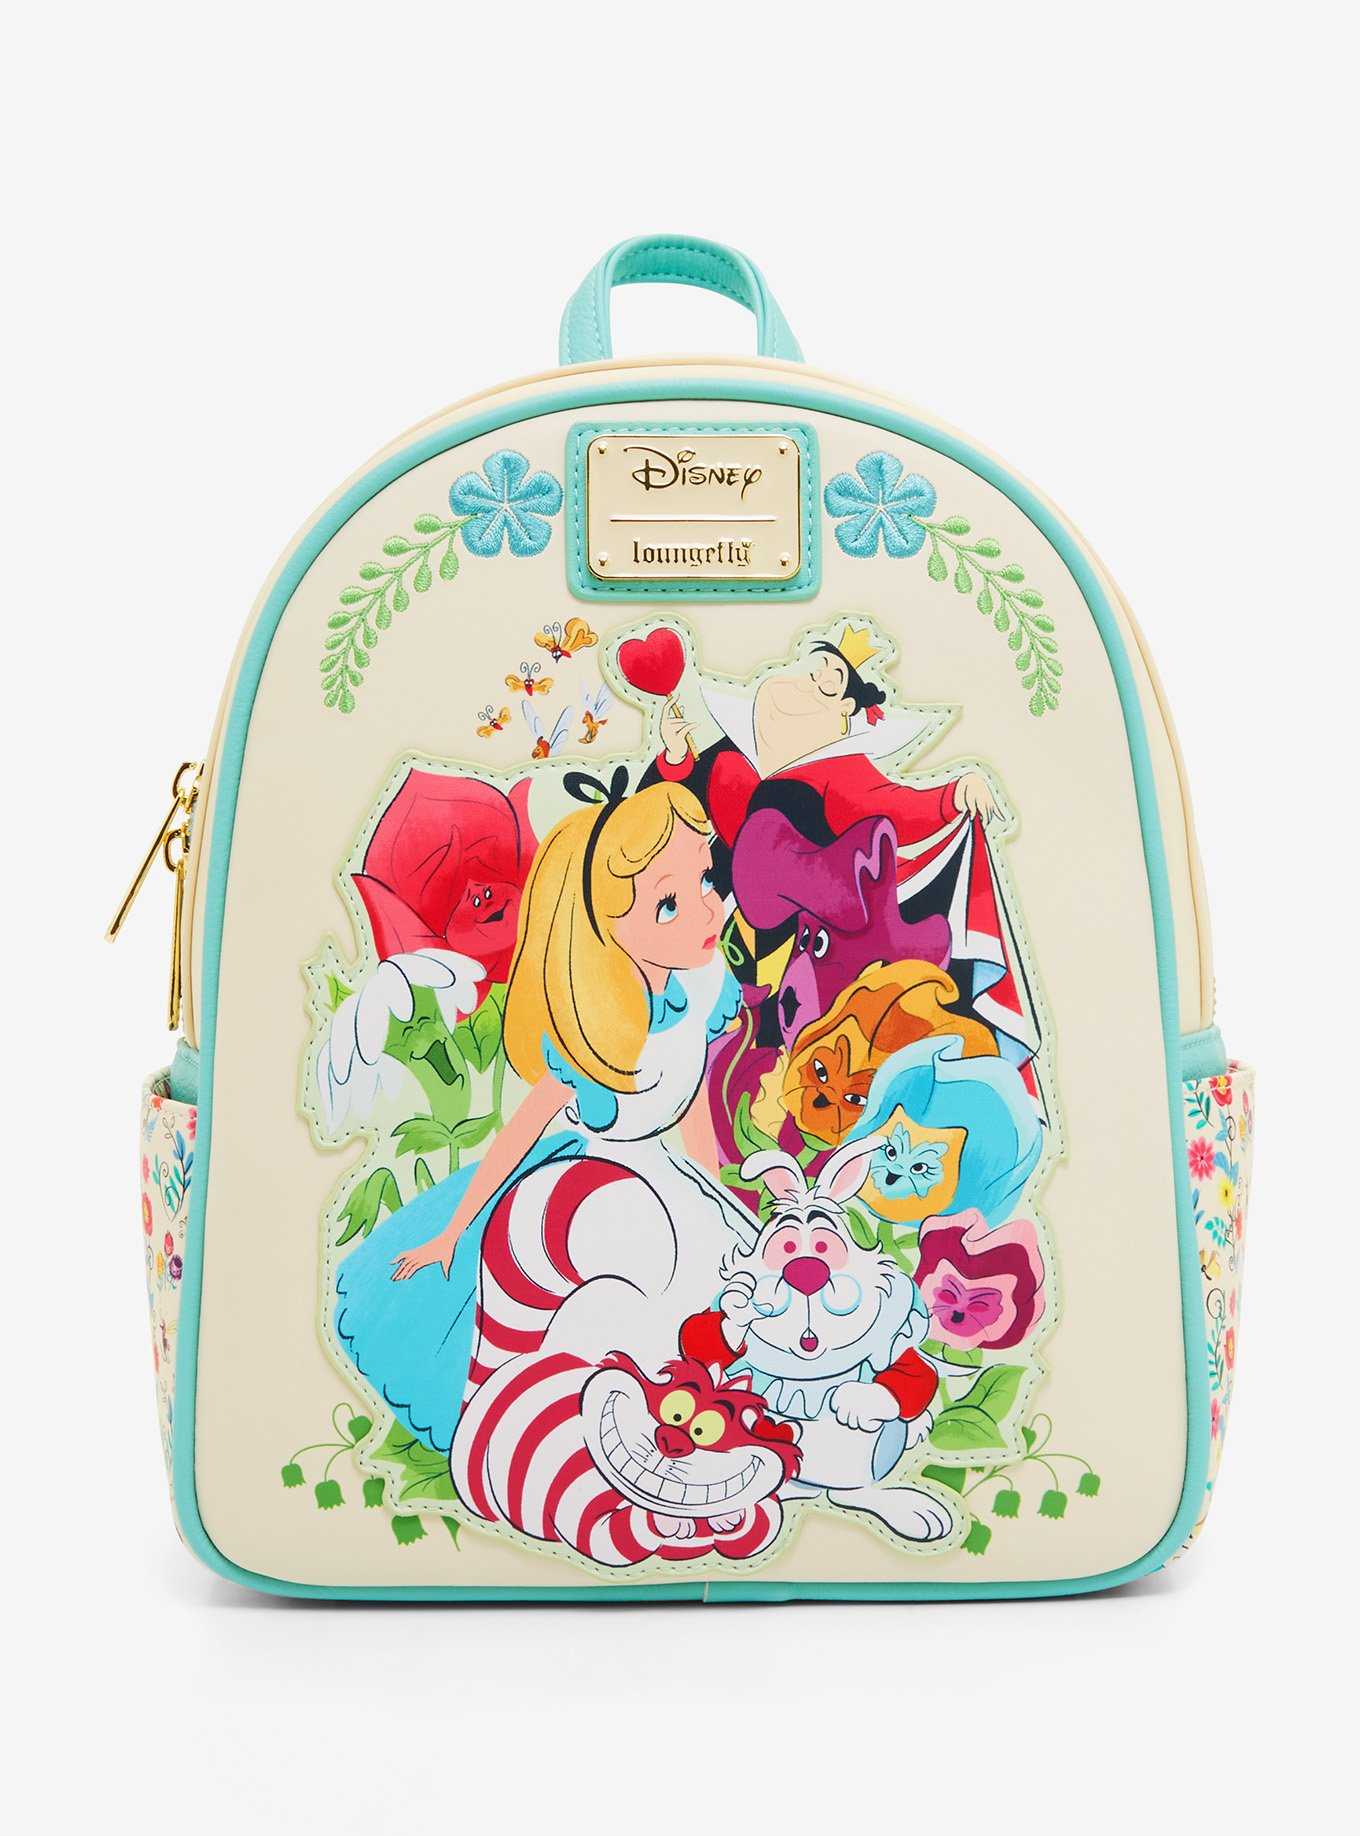 Hey Alice in Wonderland Fans! We've Spotted The Perfect New